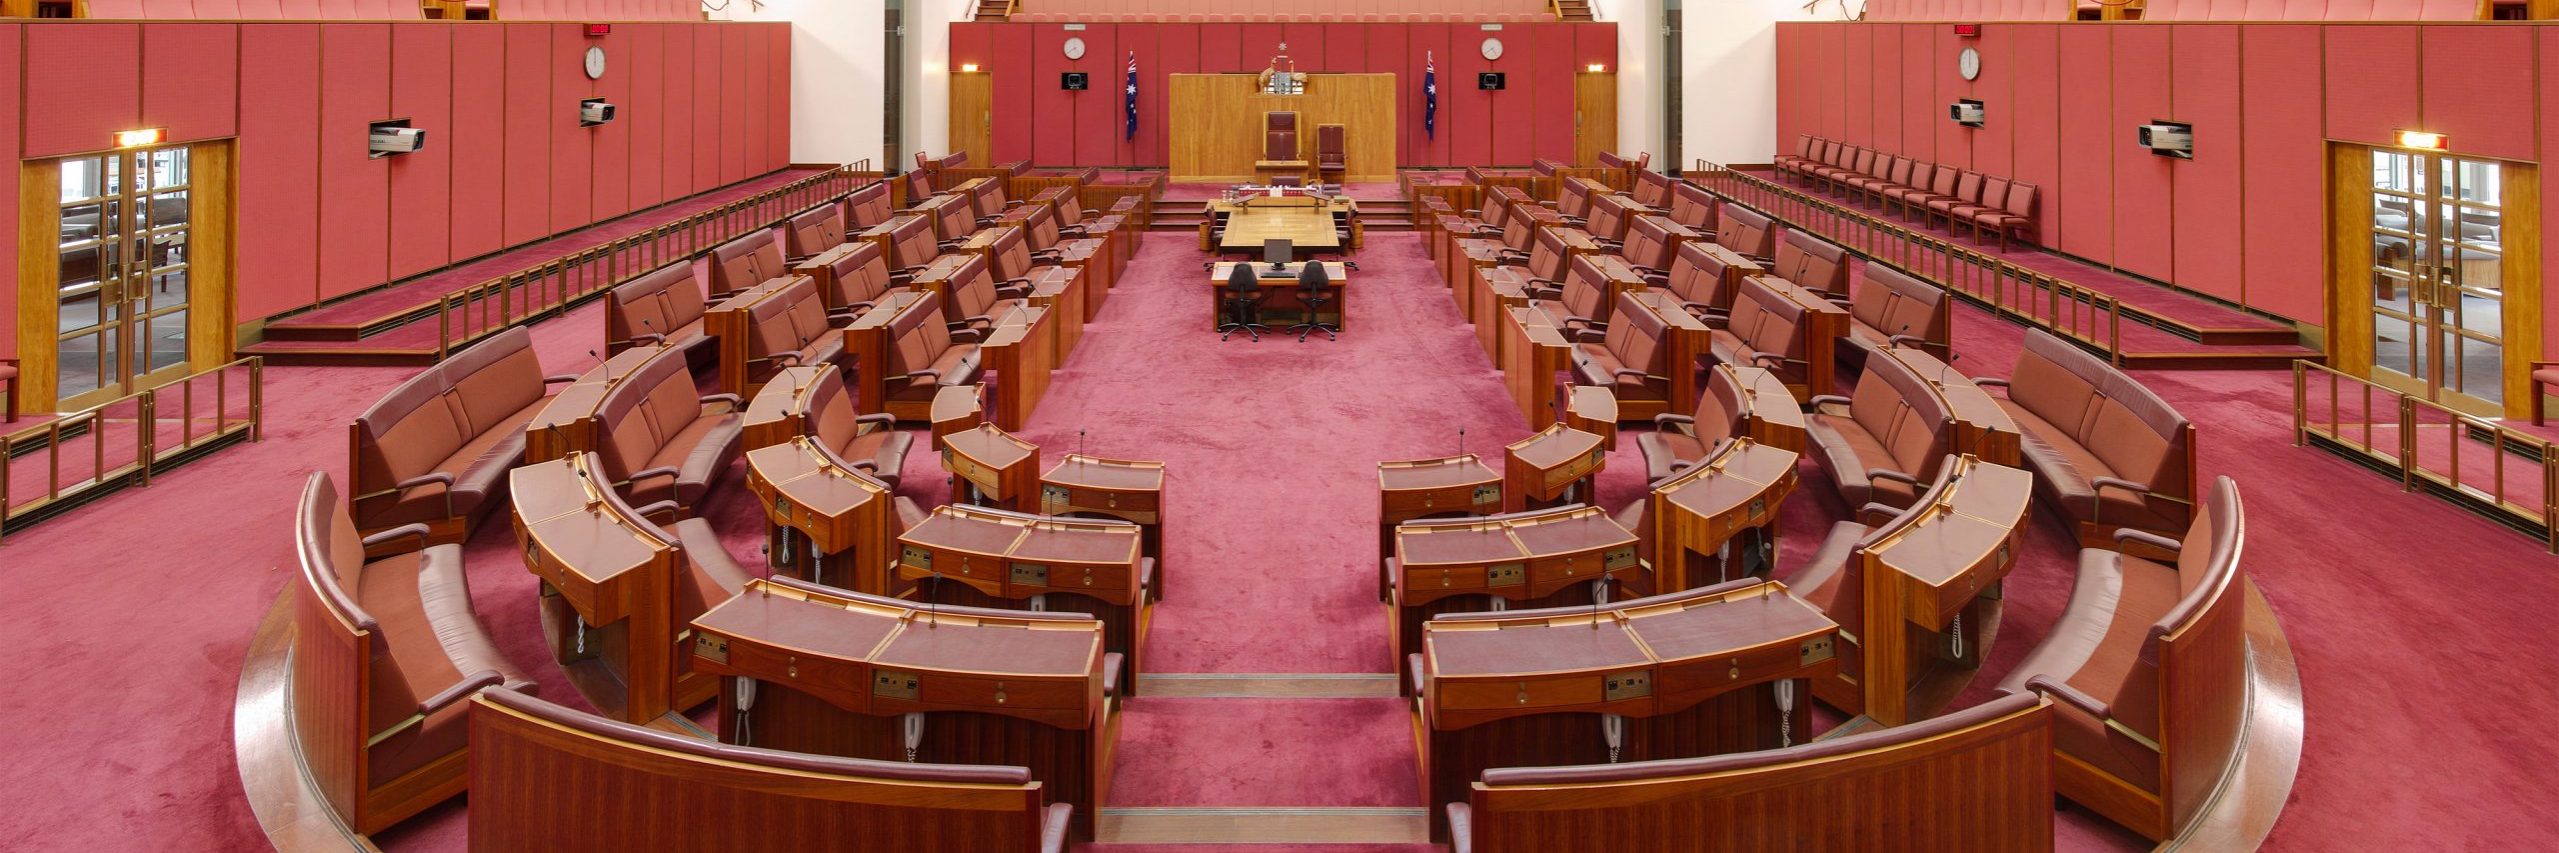 An image of the Australian Senate, which has halted a proposed immigration bill